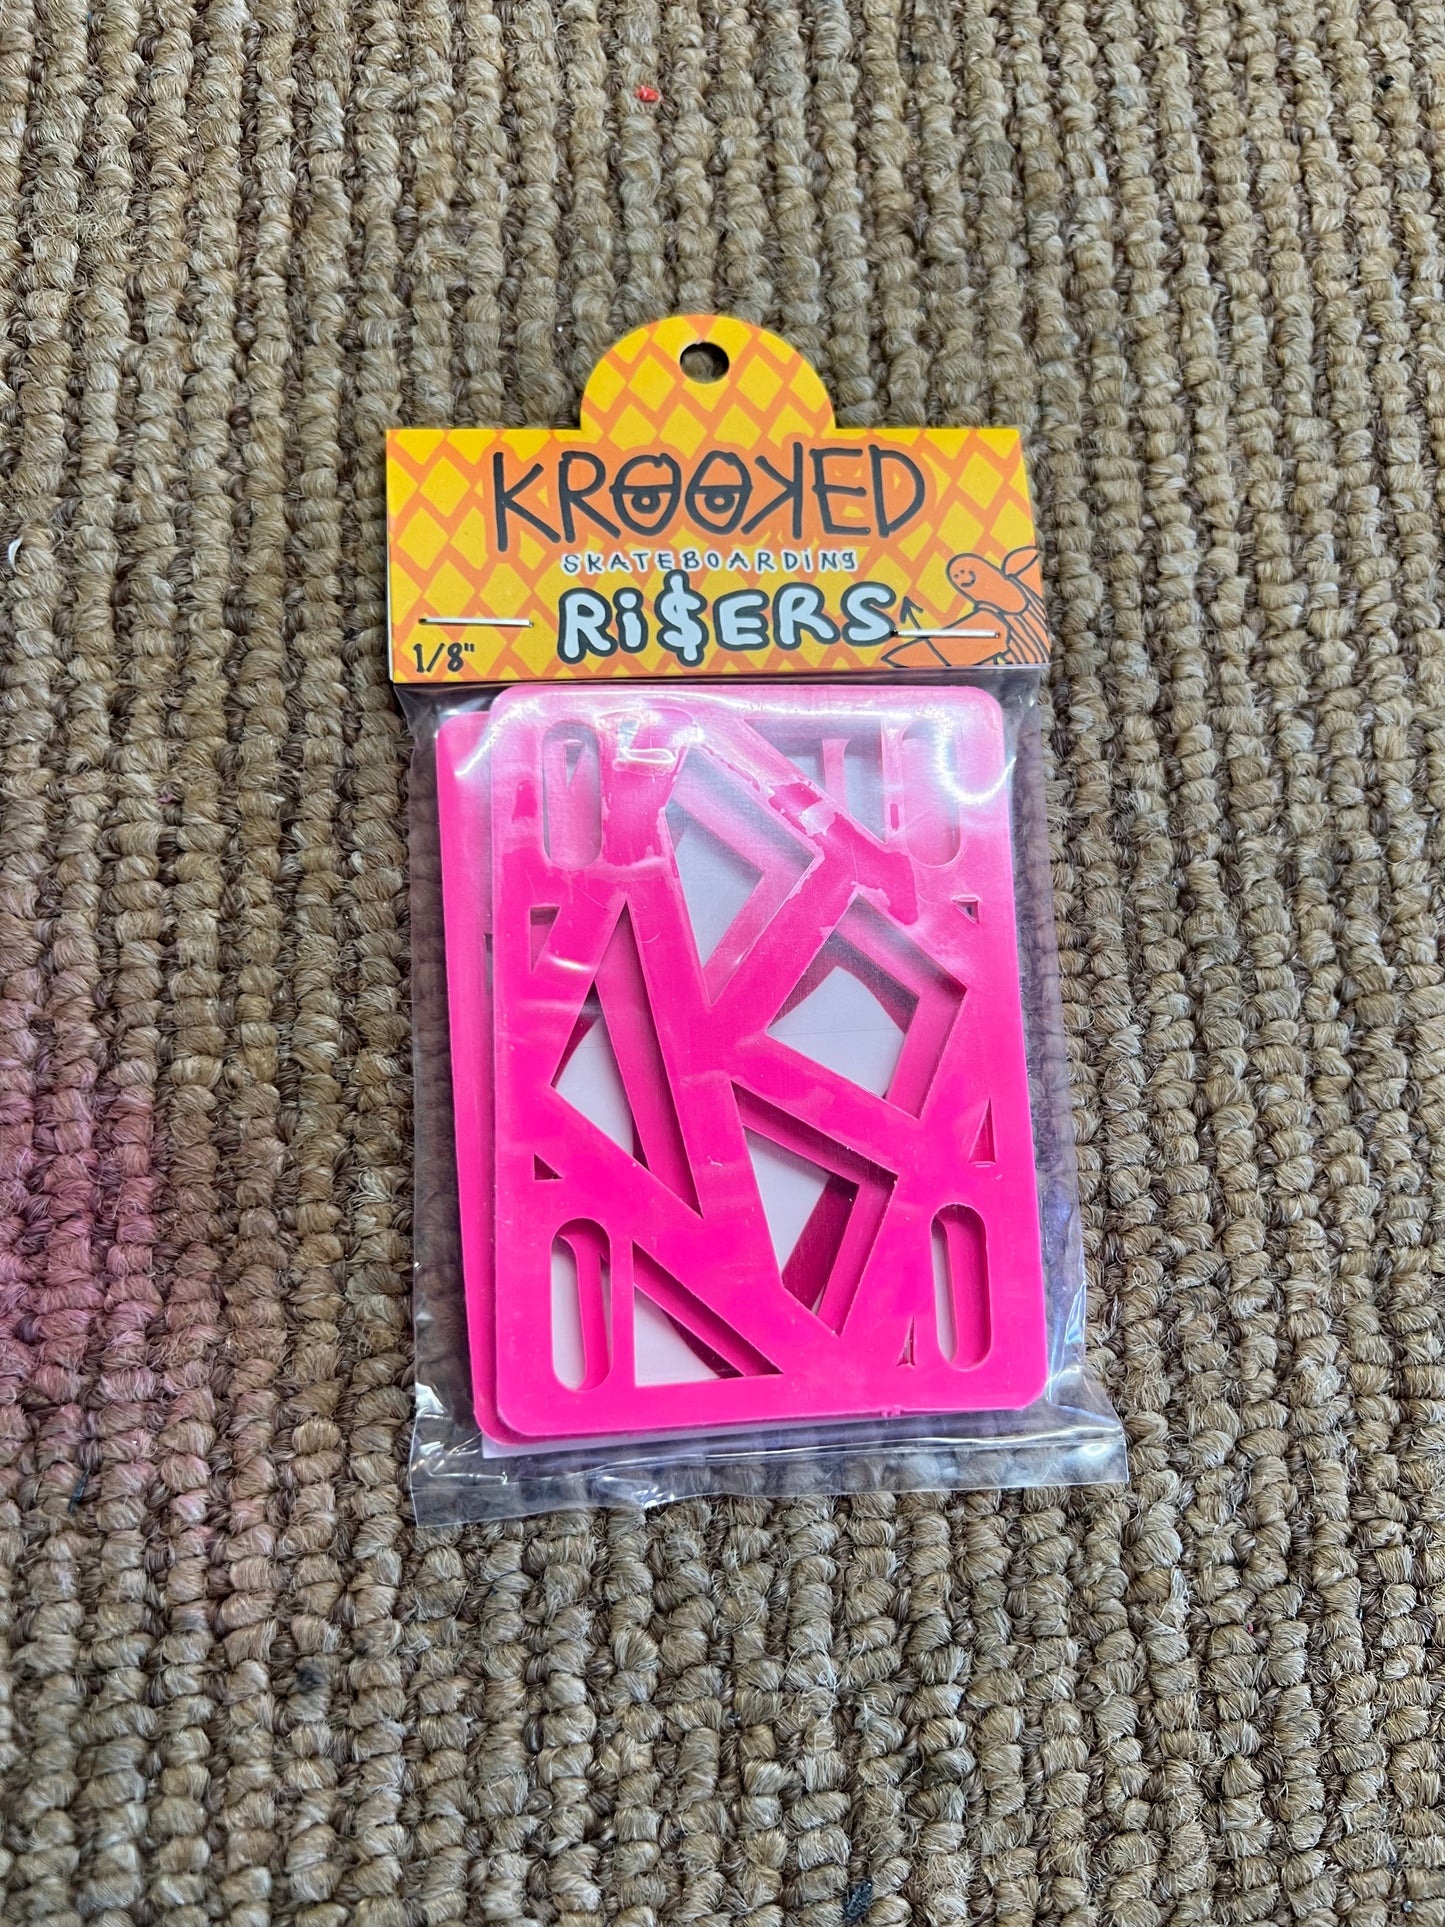 Krooked Pink risers 1/8th